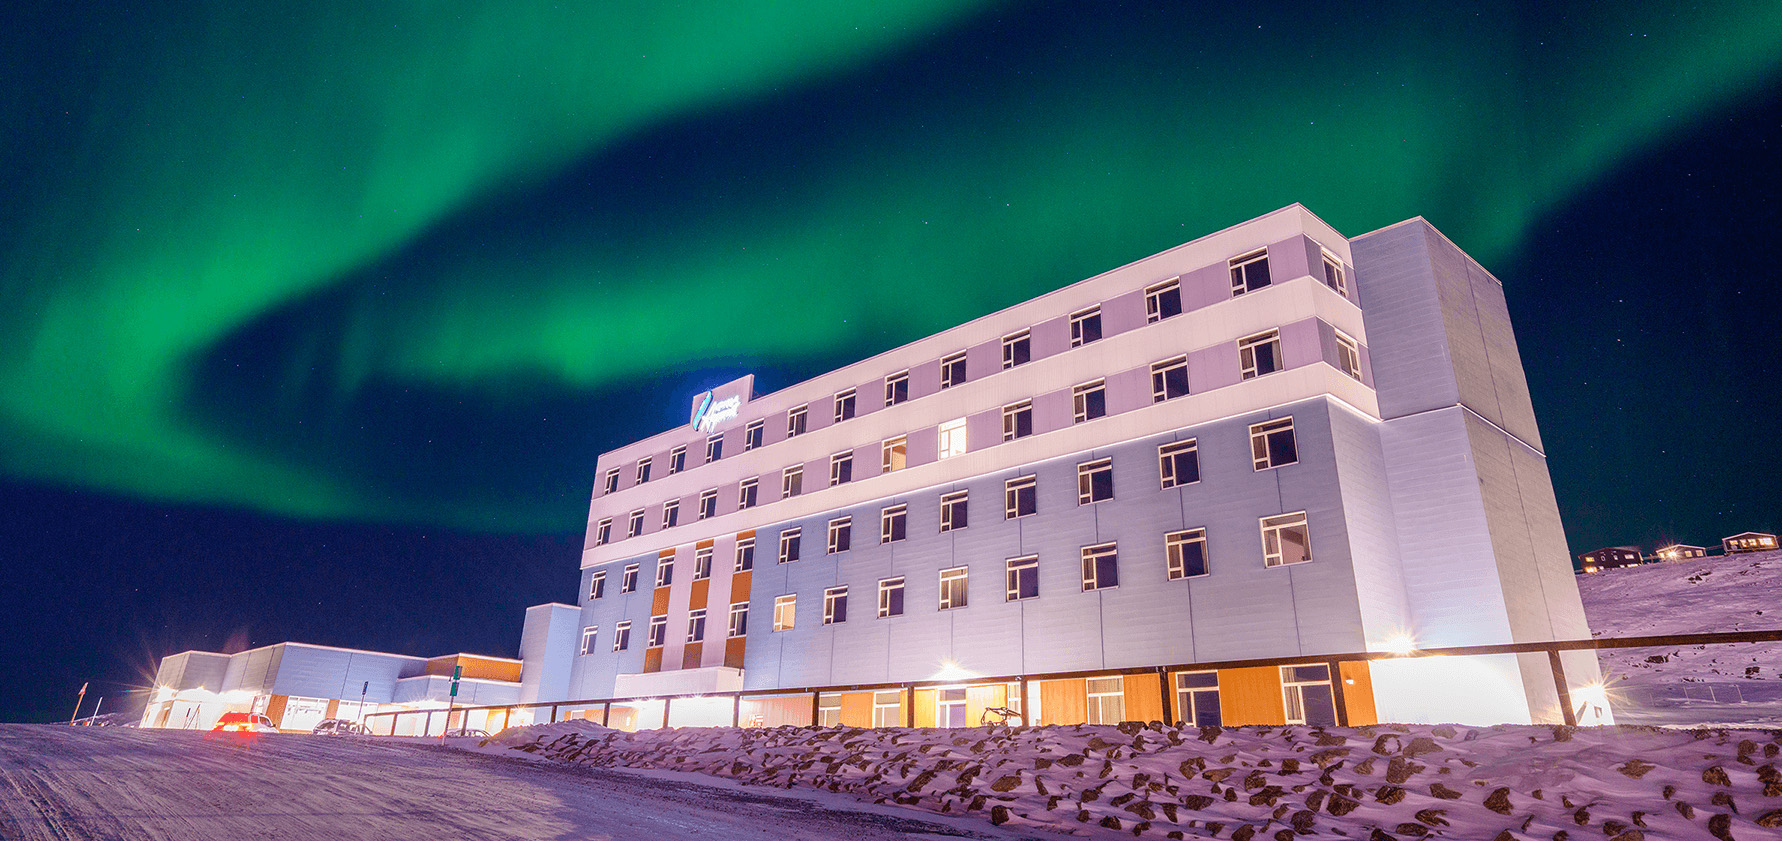 Outside view of the new Aqsarniit Hotel in Iqaluit, Nunavut.